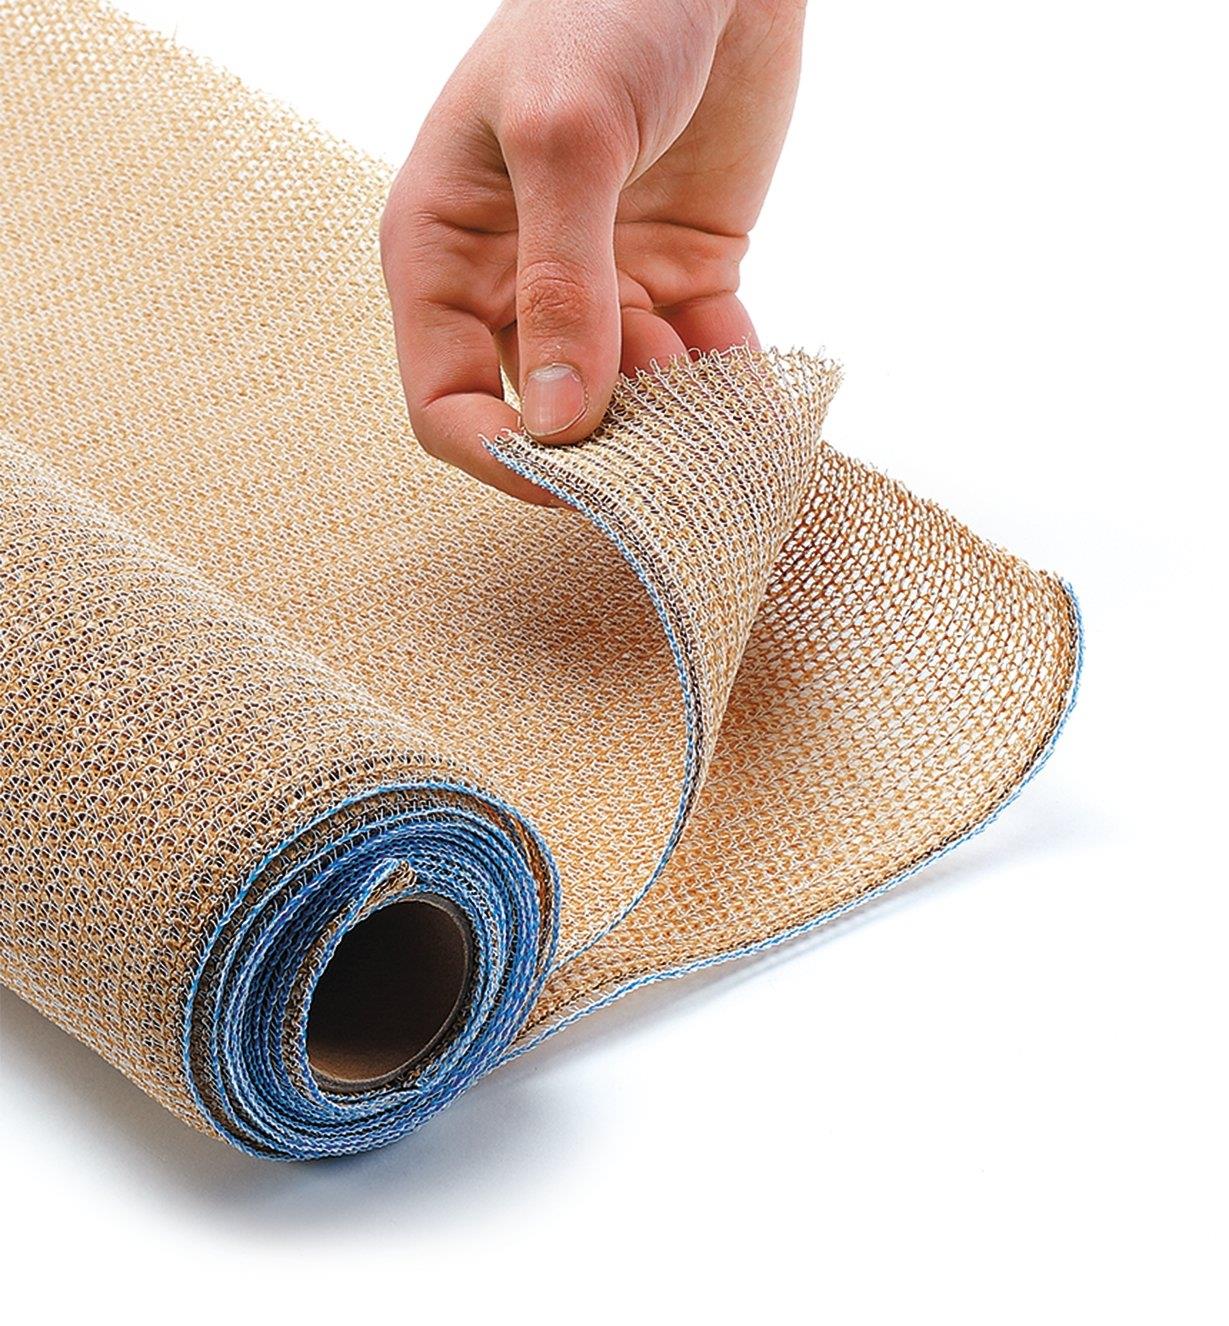 One end of the shade fabric roll is turned back to show the knitted fabric and stitched edges